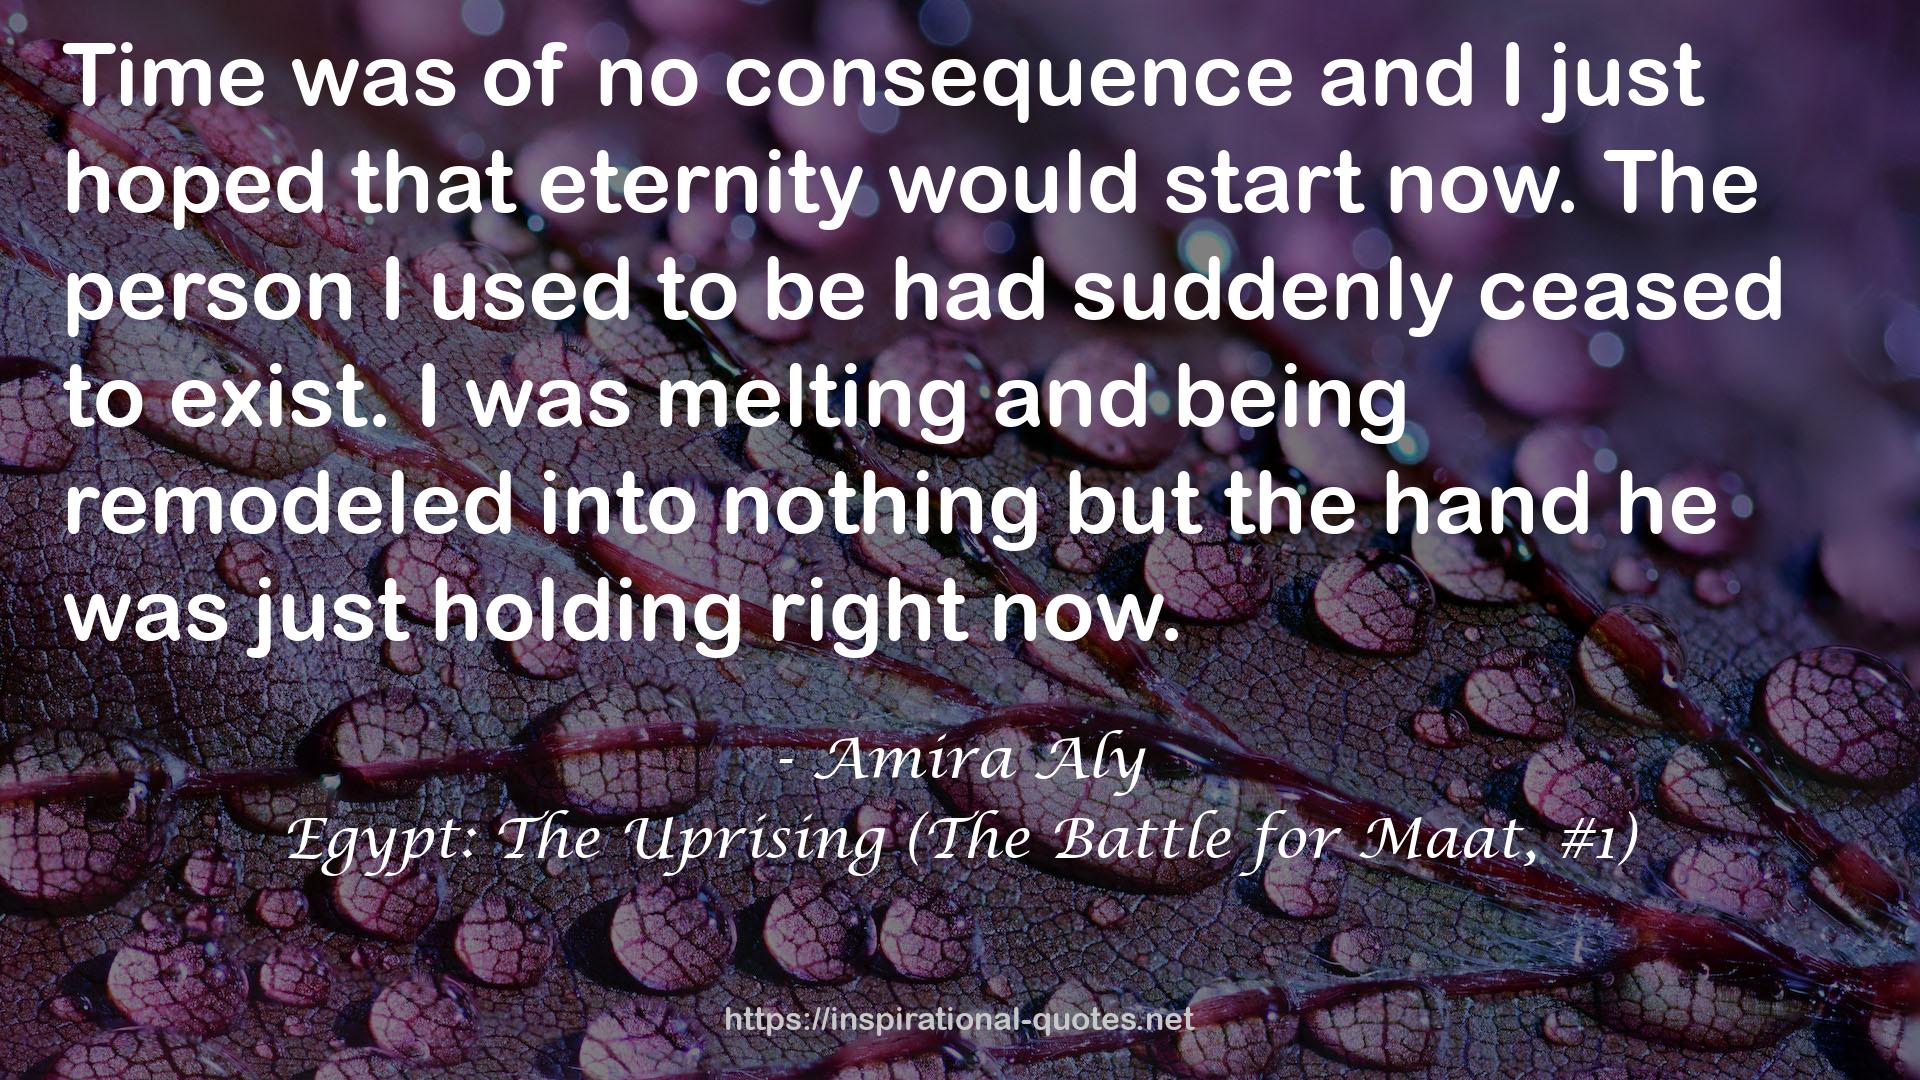 Egypt: The Uprising (The Battle for Maat, #1) QUOTES